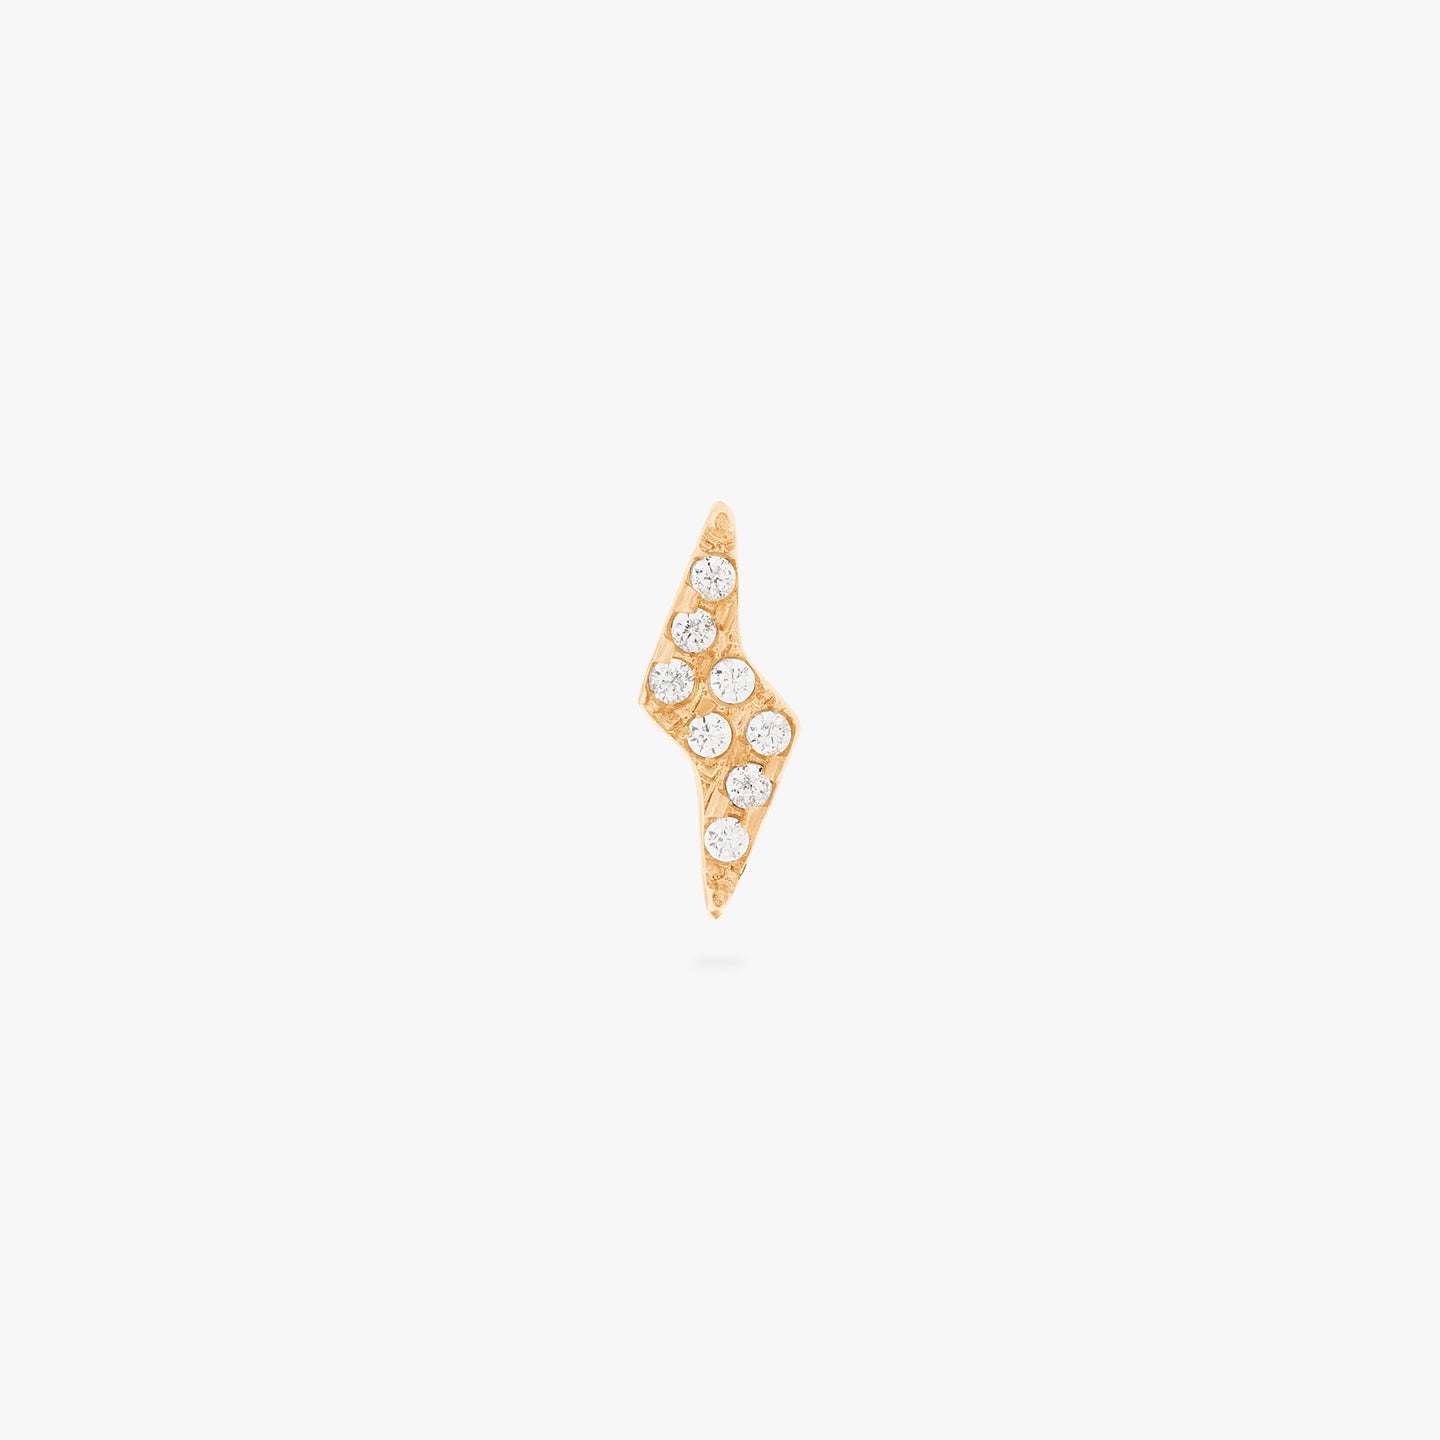 This is an image of a gold/clear pave lightning-bolt shaped flatback top with a gold labret with a circle disc that has an 